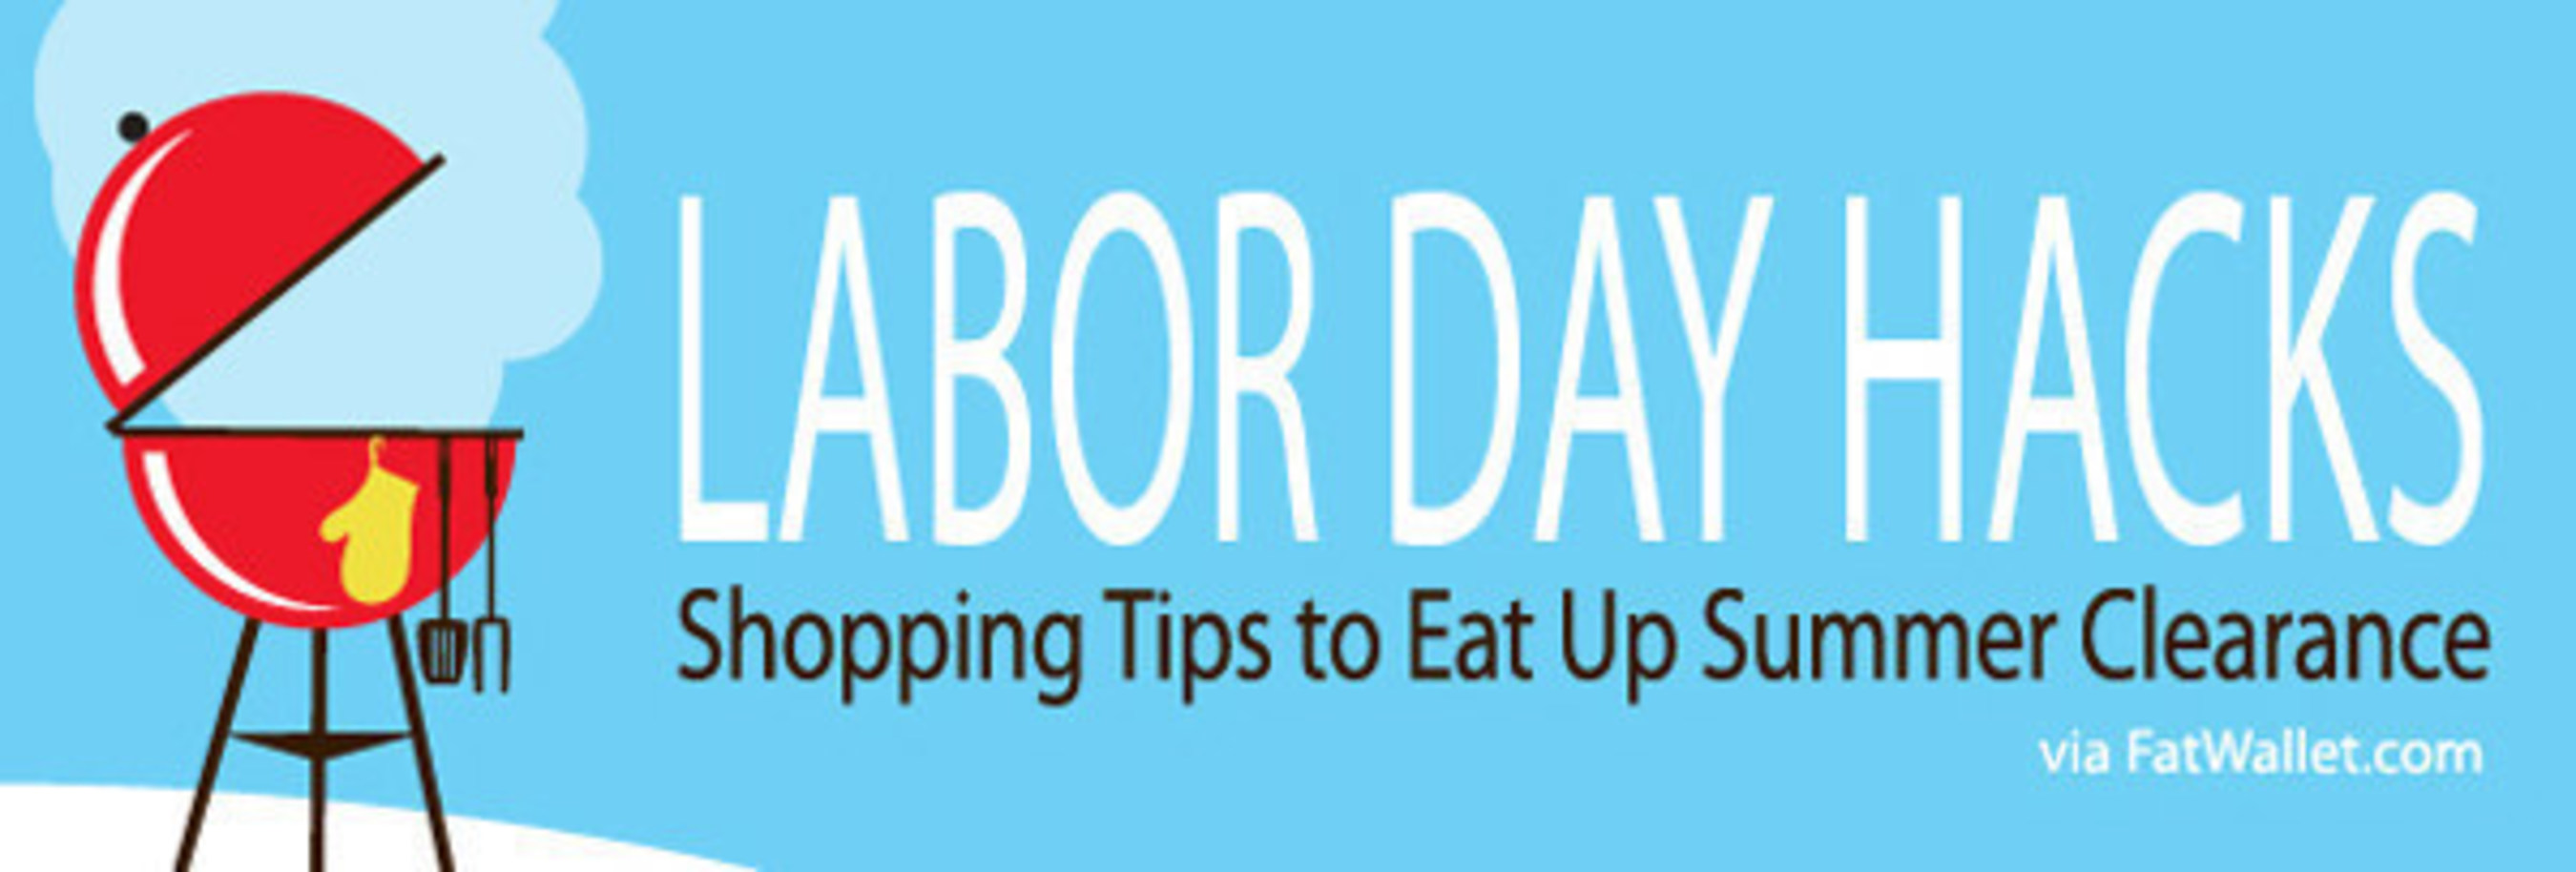 10 Best Things to Buy in September and during Labor Day Sales in 2016 - via FatWallet.com